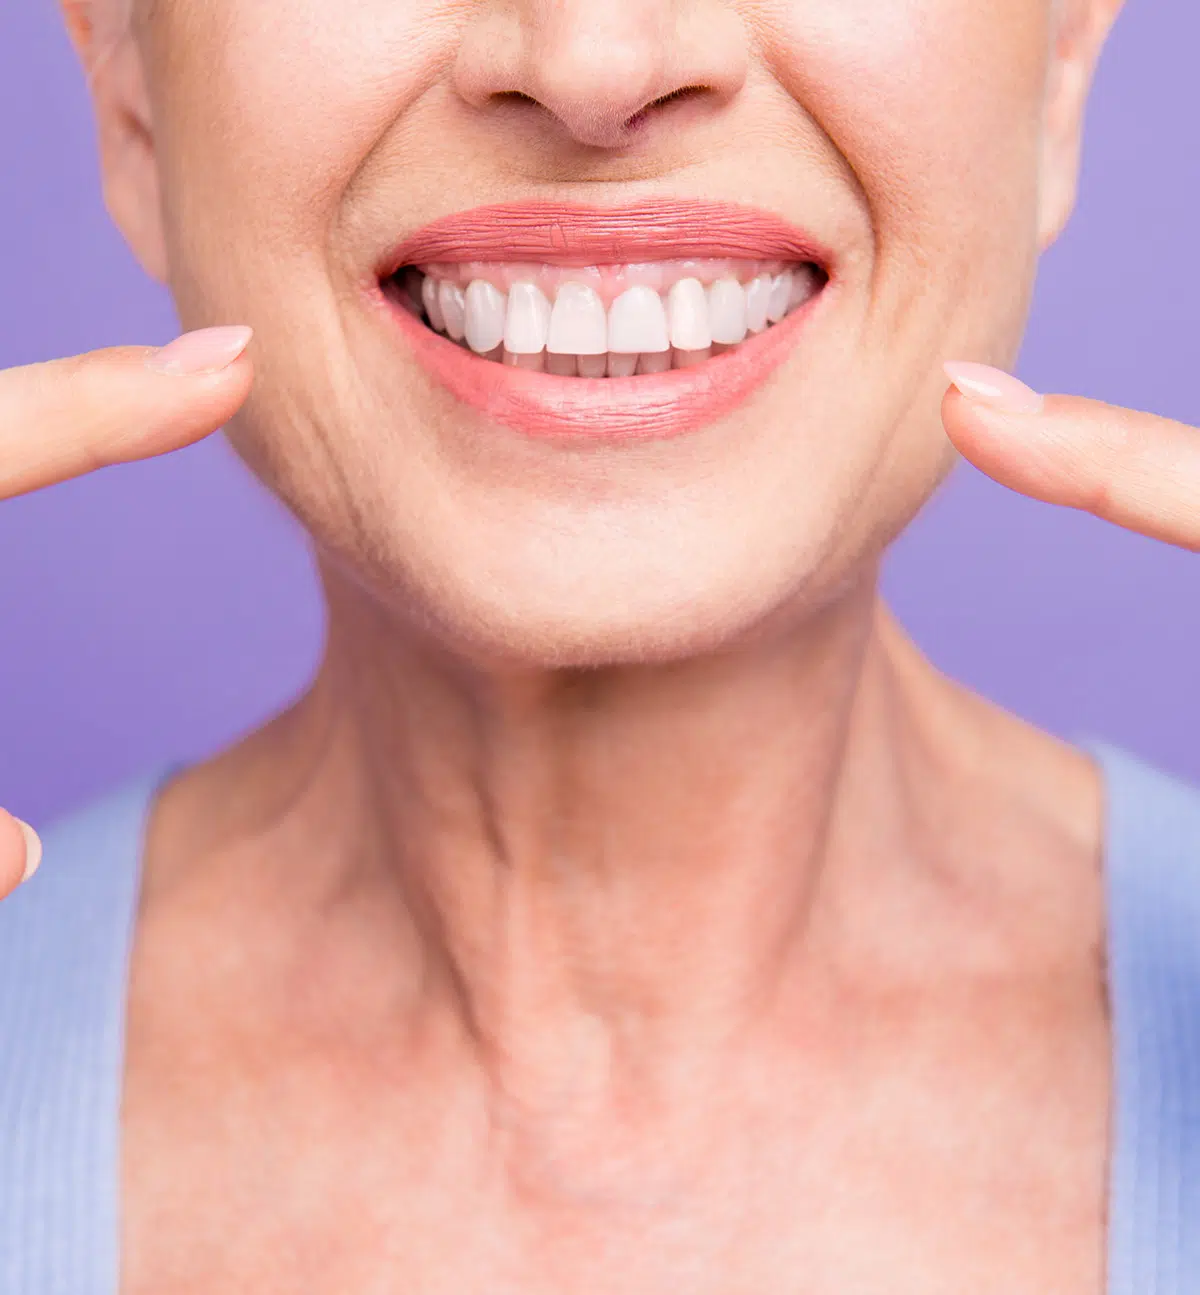 Six Issues that Dentures in Wichita Falls Can Help Fix